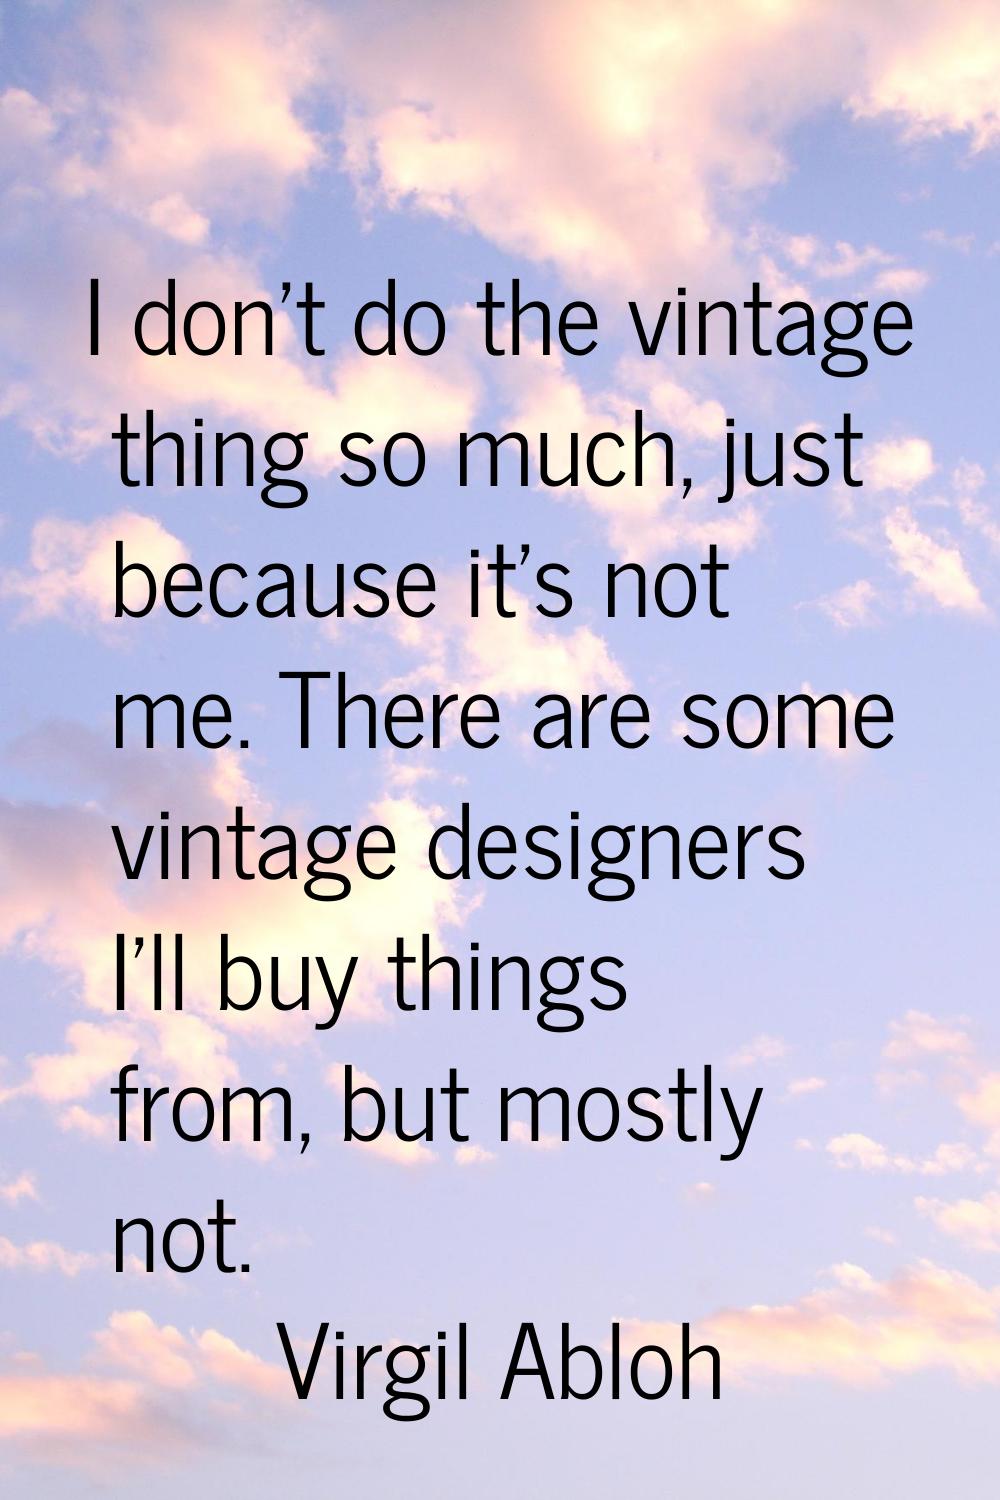 I don't do the vintage thing so much, just because it's not me. There are some vintage designers I'